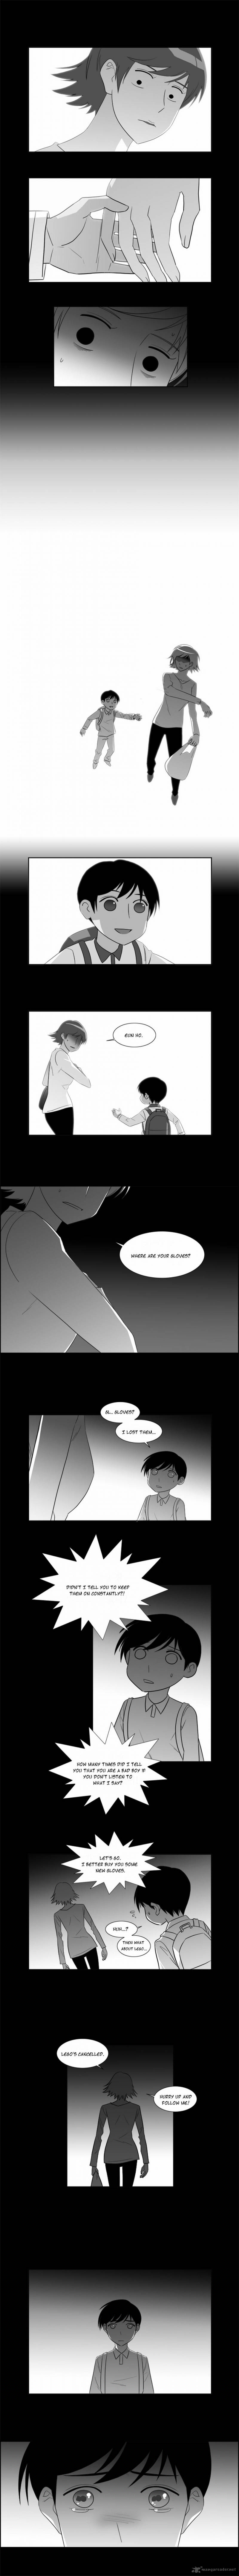 Melo Holic Chapter 23 Page 2